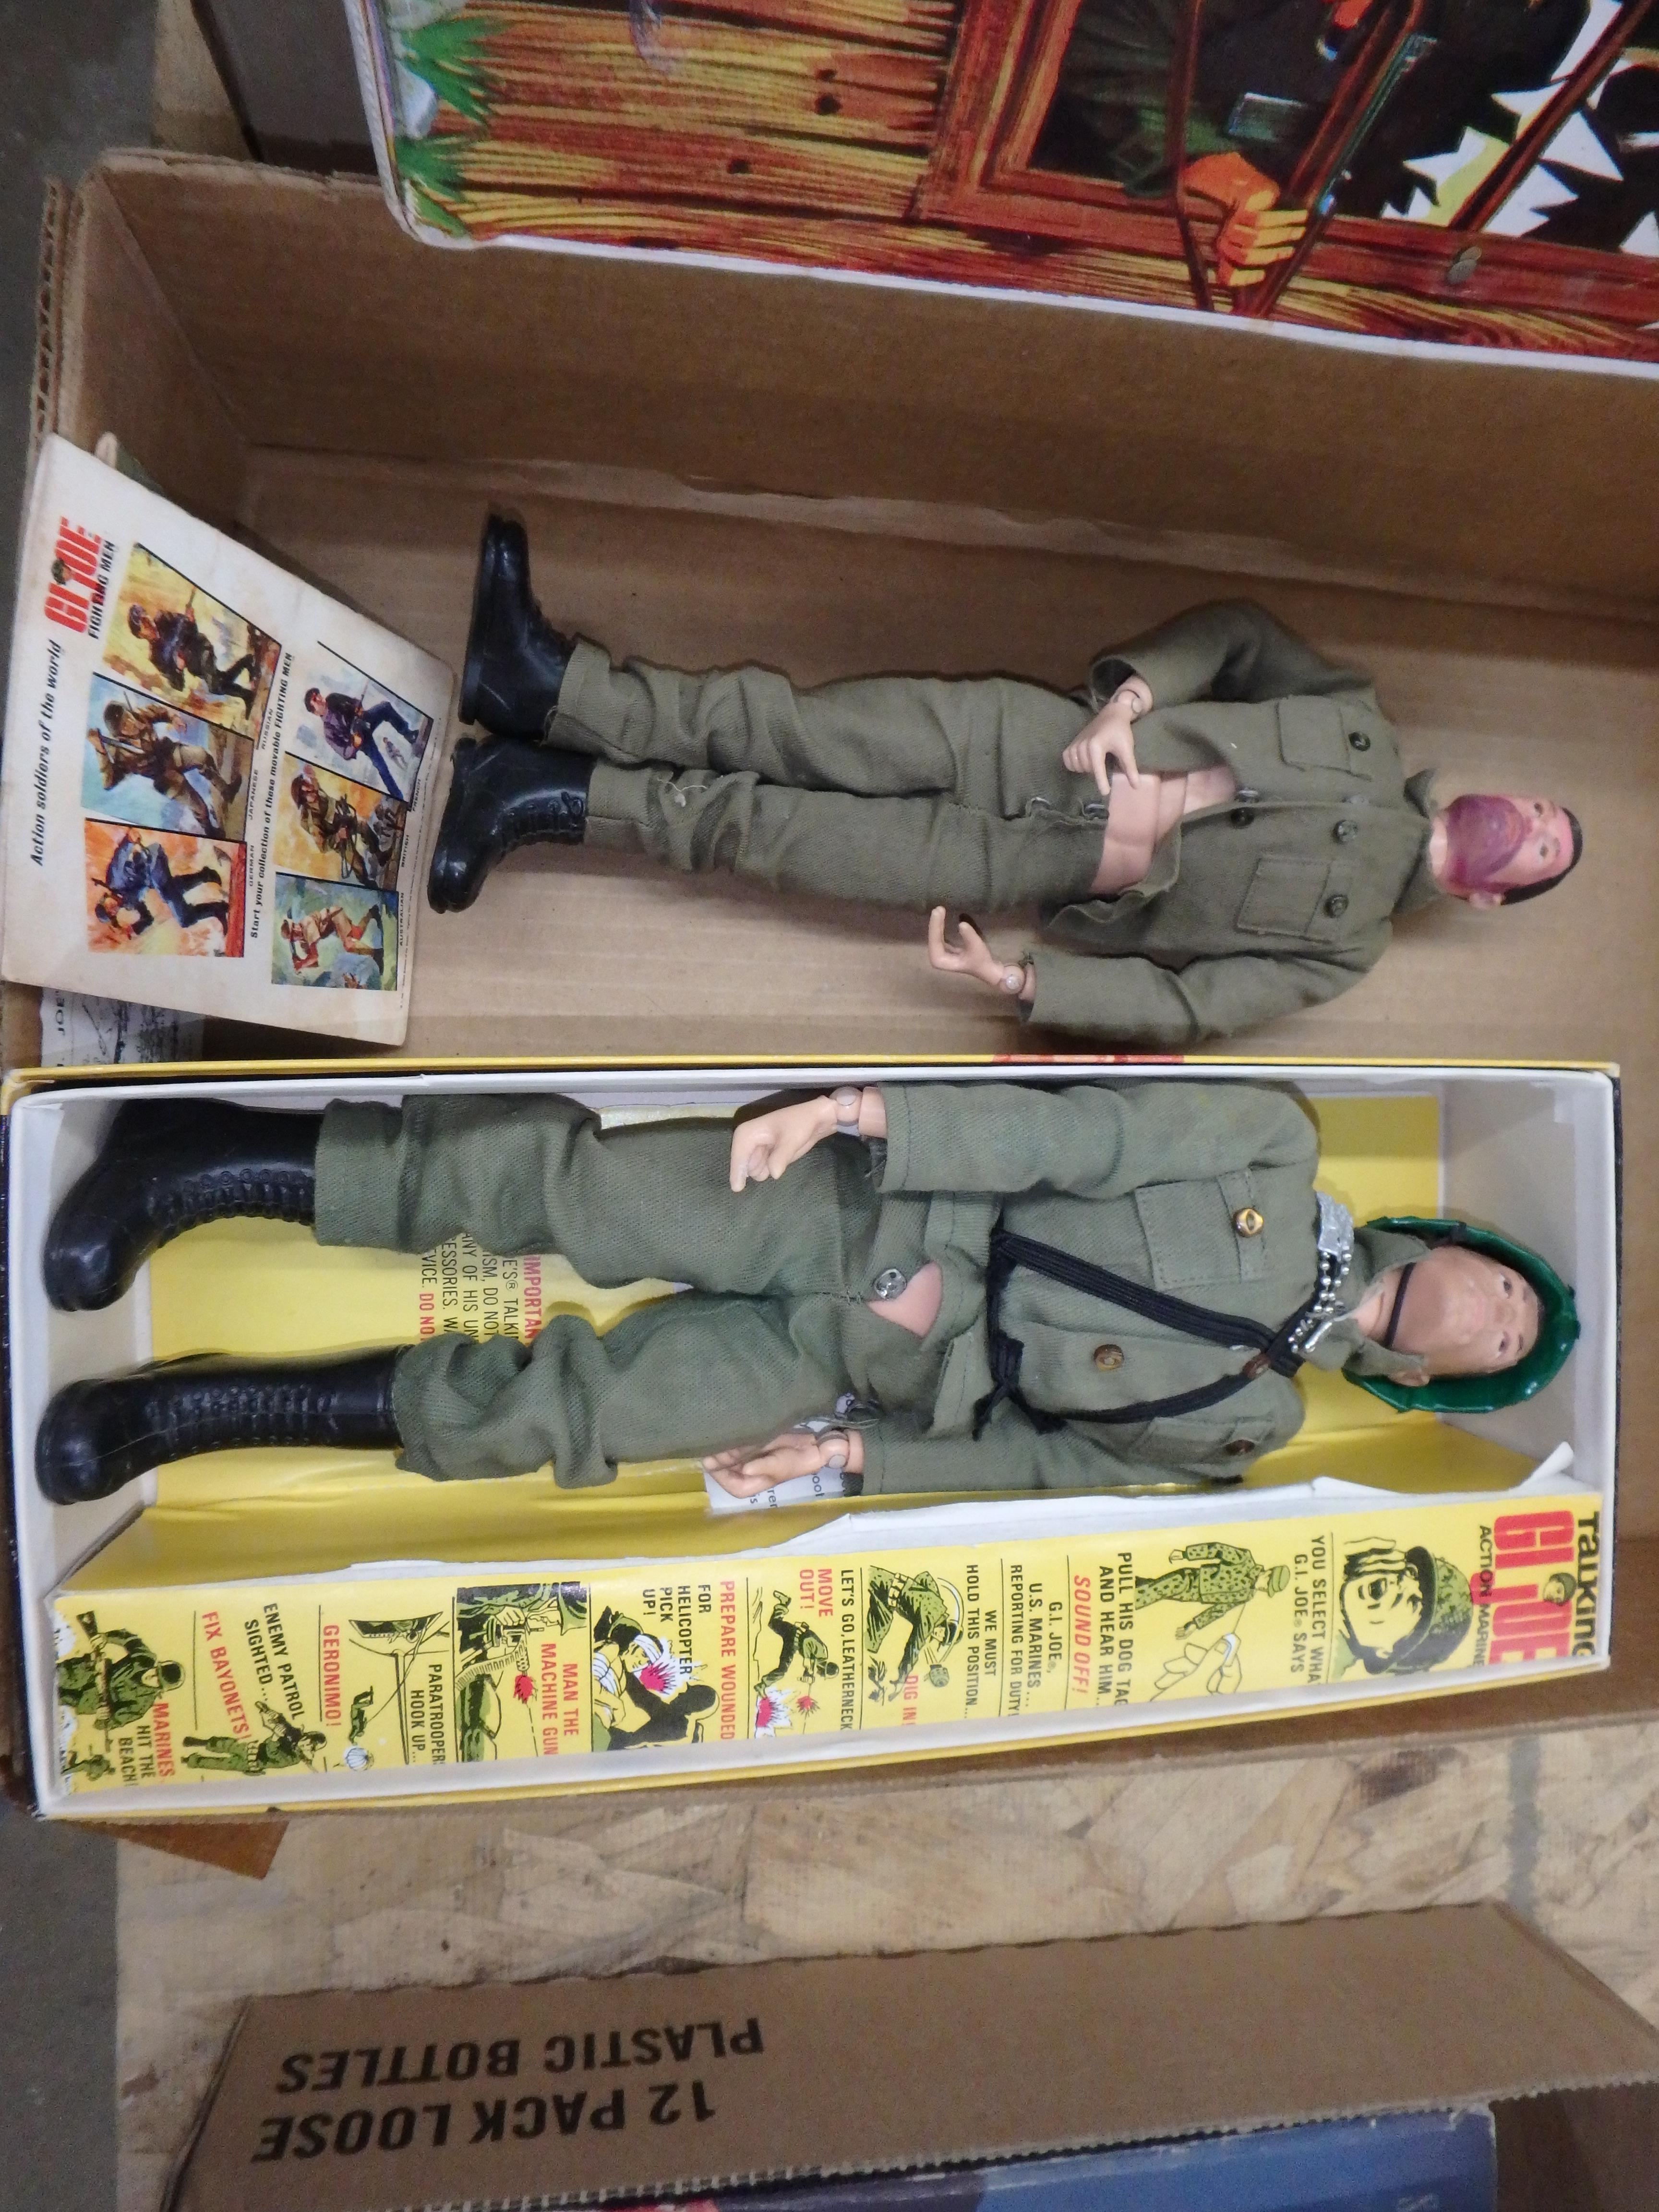 GI Joe dolls, wood storage box, clothing and accessories, including guns, space suits and wet suits